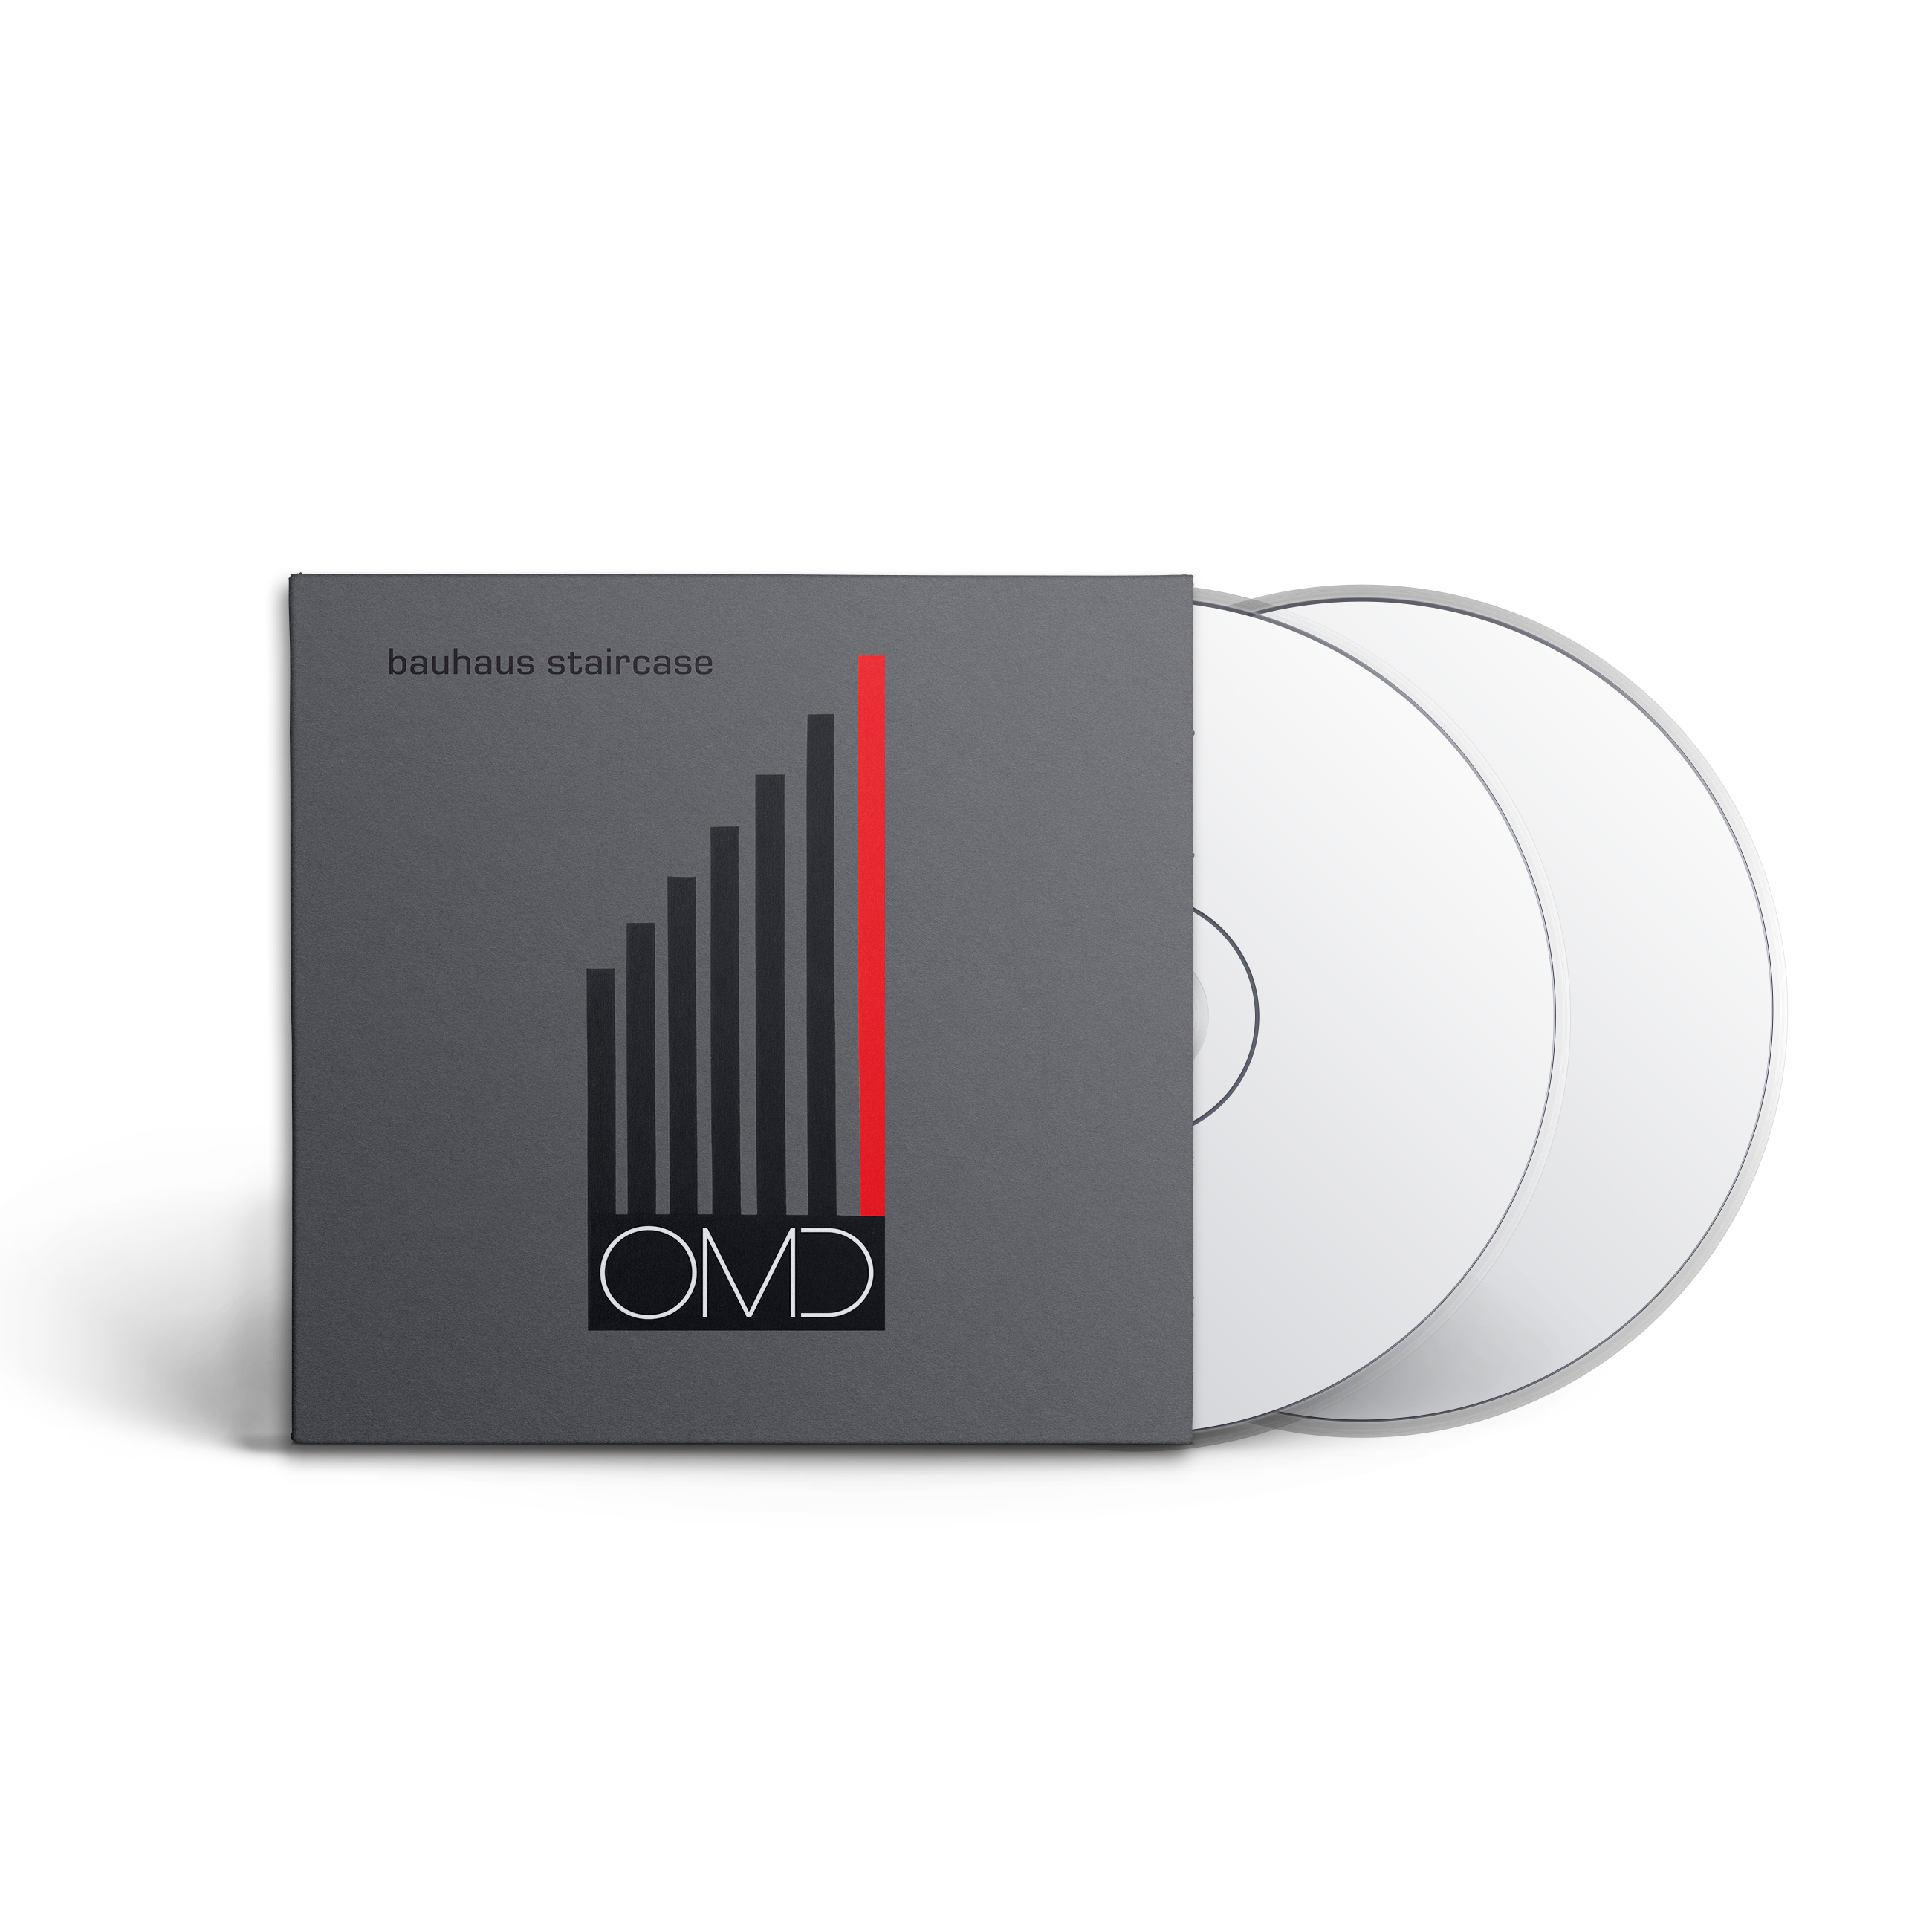 OMD - Bauhaus Staircase: Limited Edition 2CD